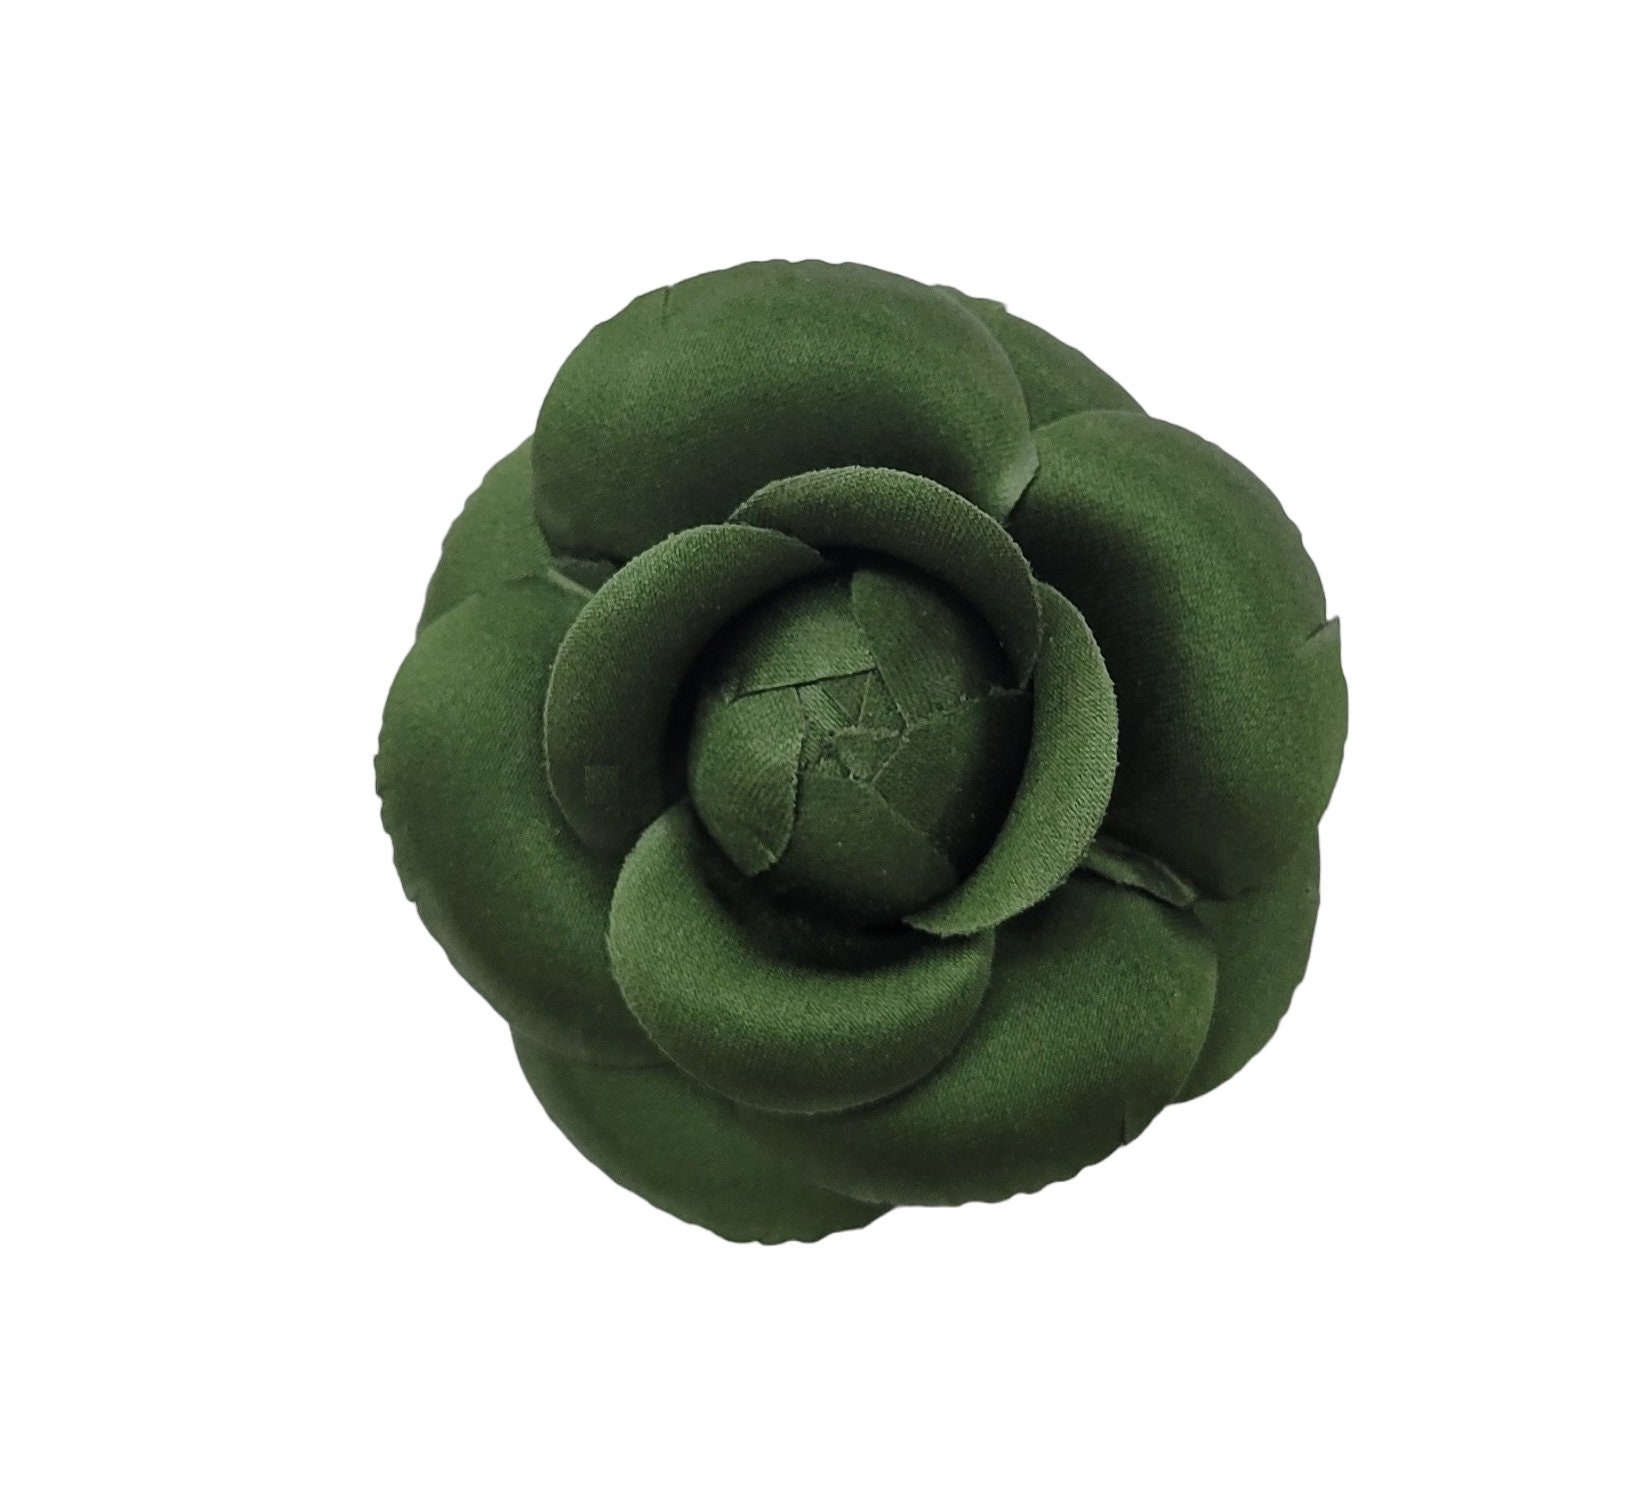 GUMEGE Camellia Brooch Pin Camellia Flower Pin for Women Elegant Wool Flower Brooch Vintage Bow Floral Pin Pearl Clothing Bag Scarf Decoration Accessories